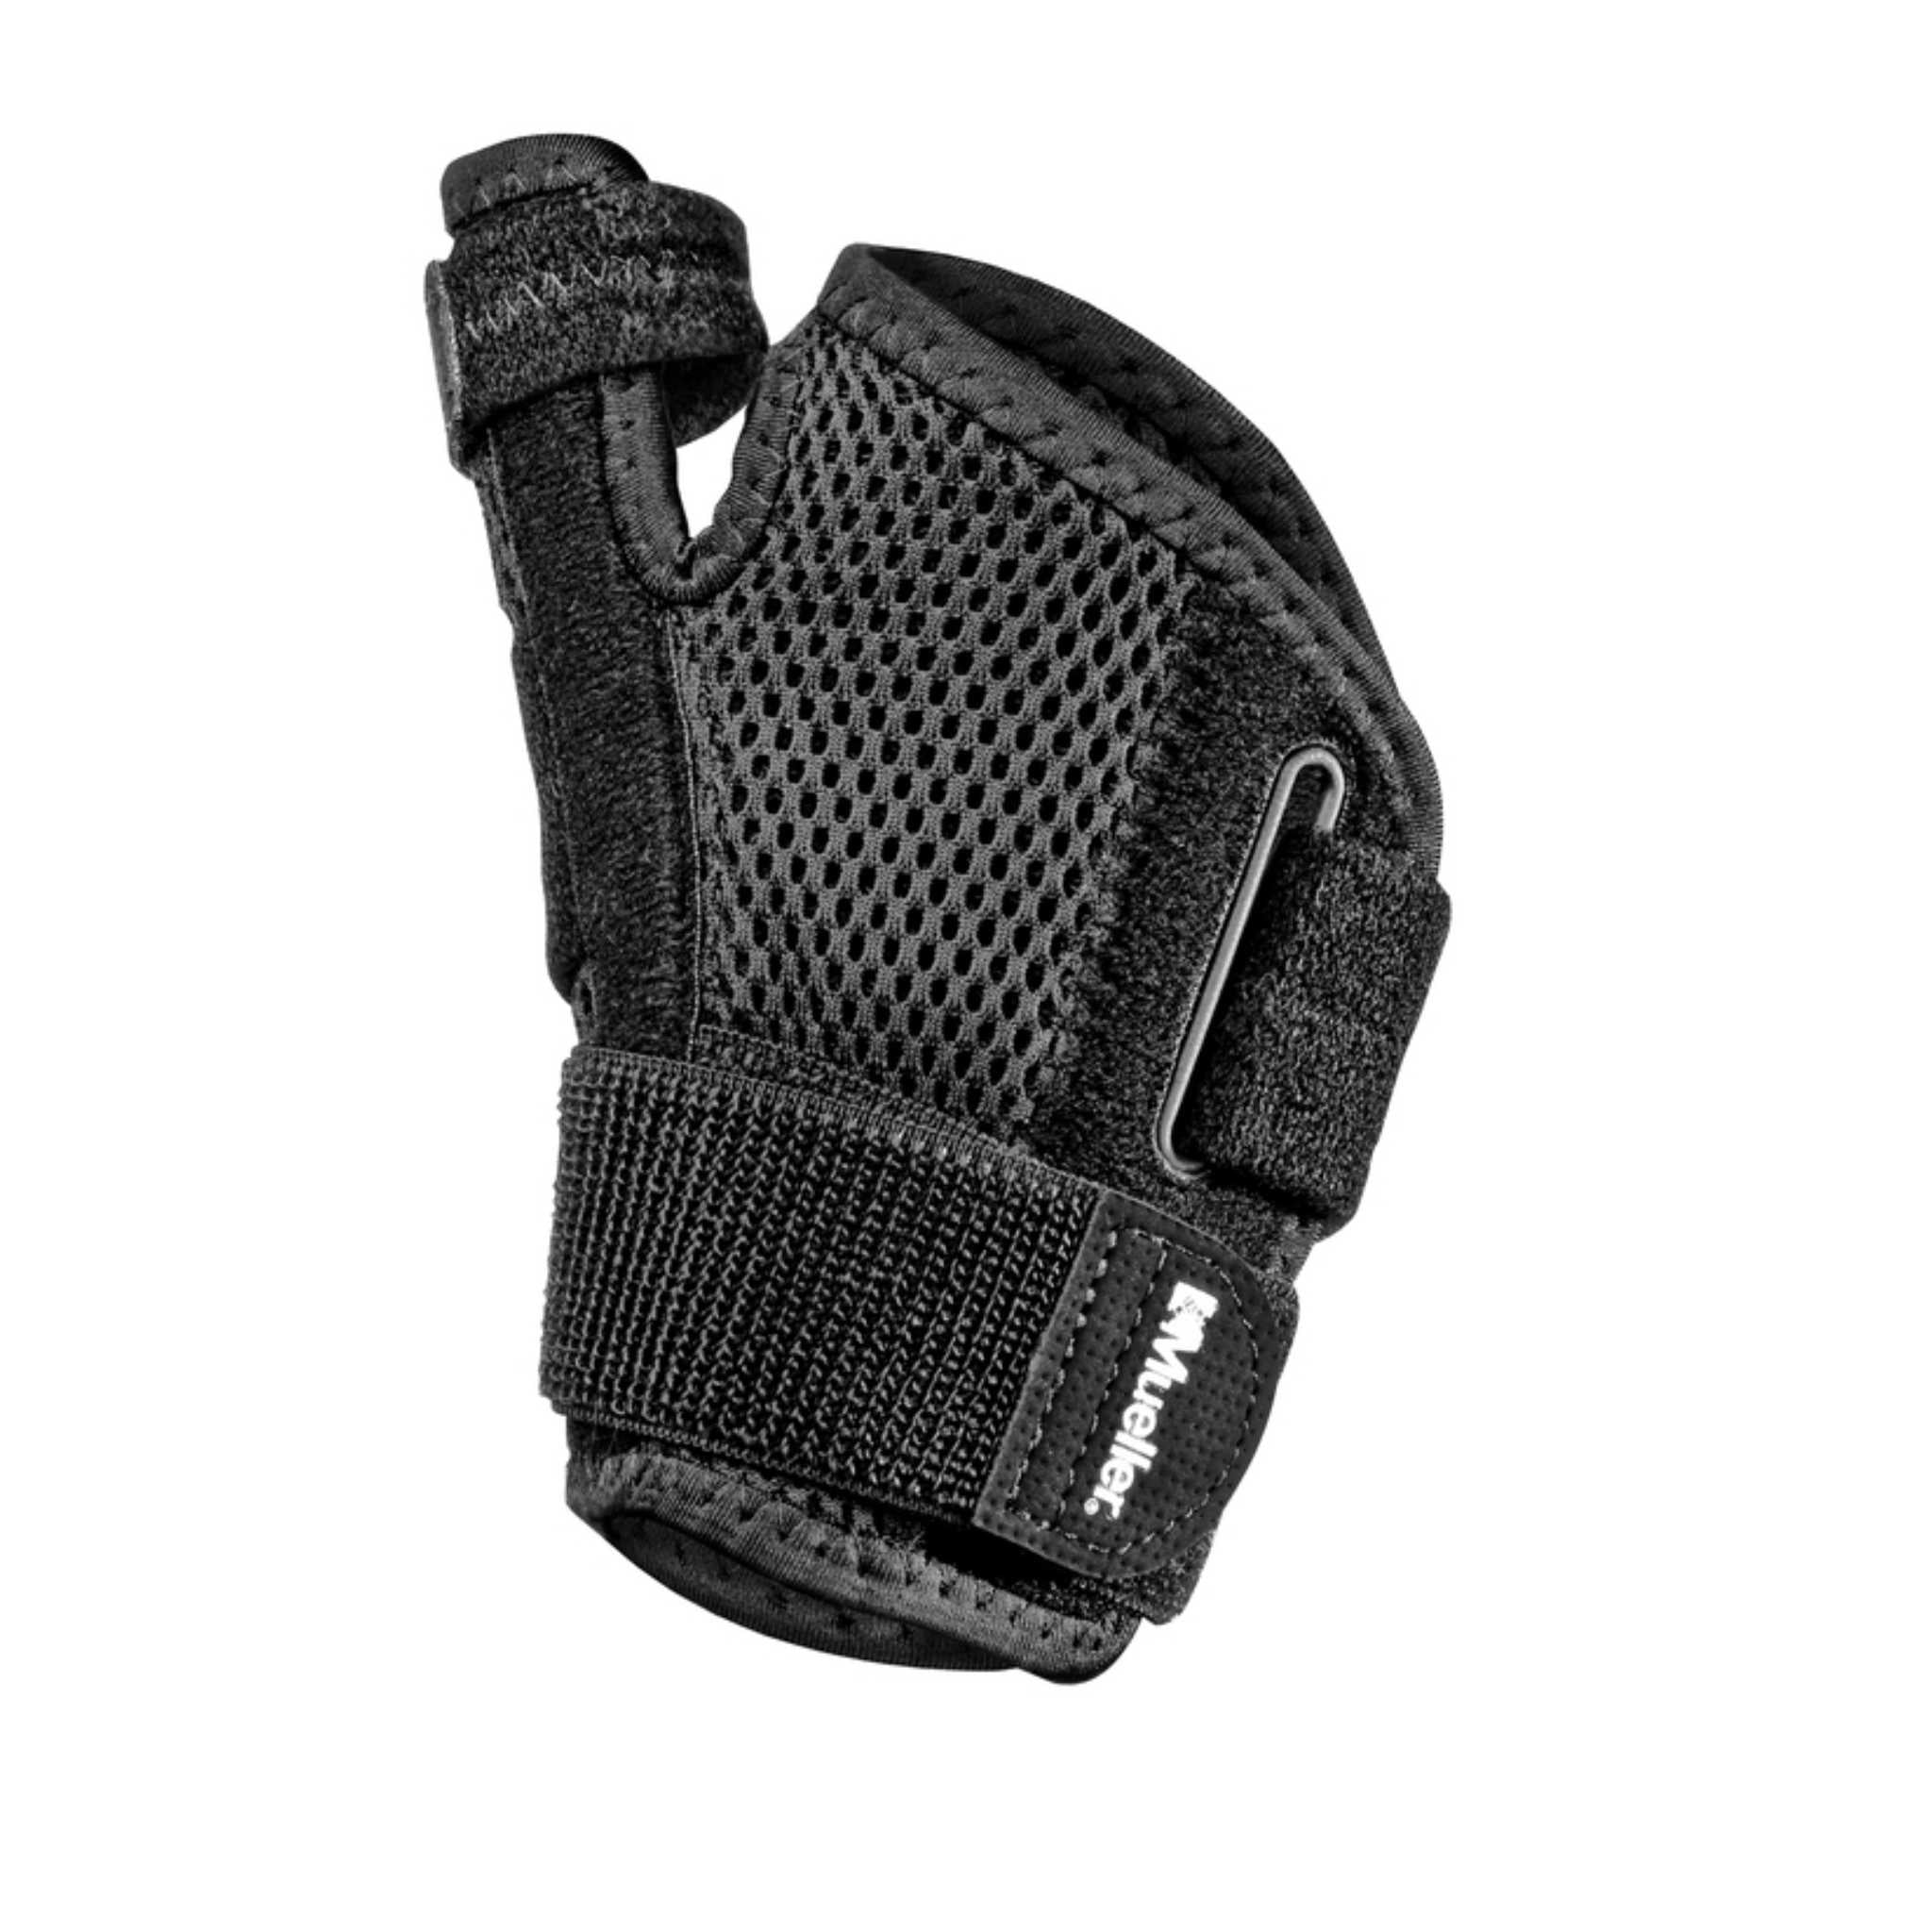 Mueller® Reversible Thumb Stabilizer, Unisex, One Size Fits Most - Black